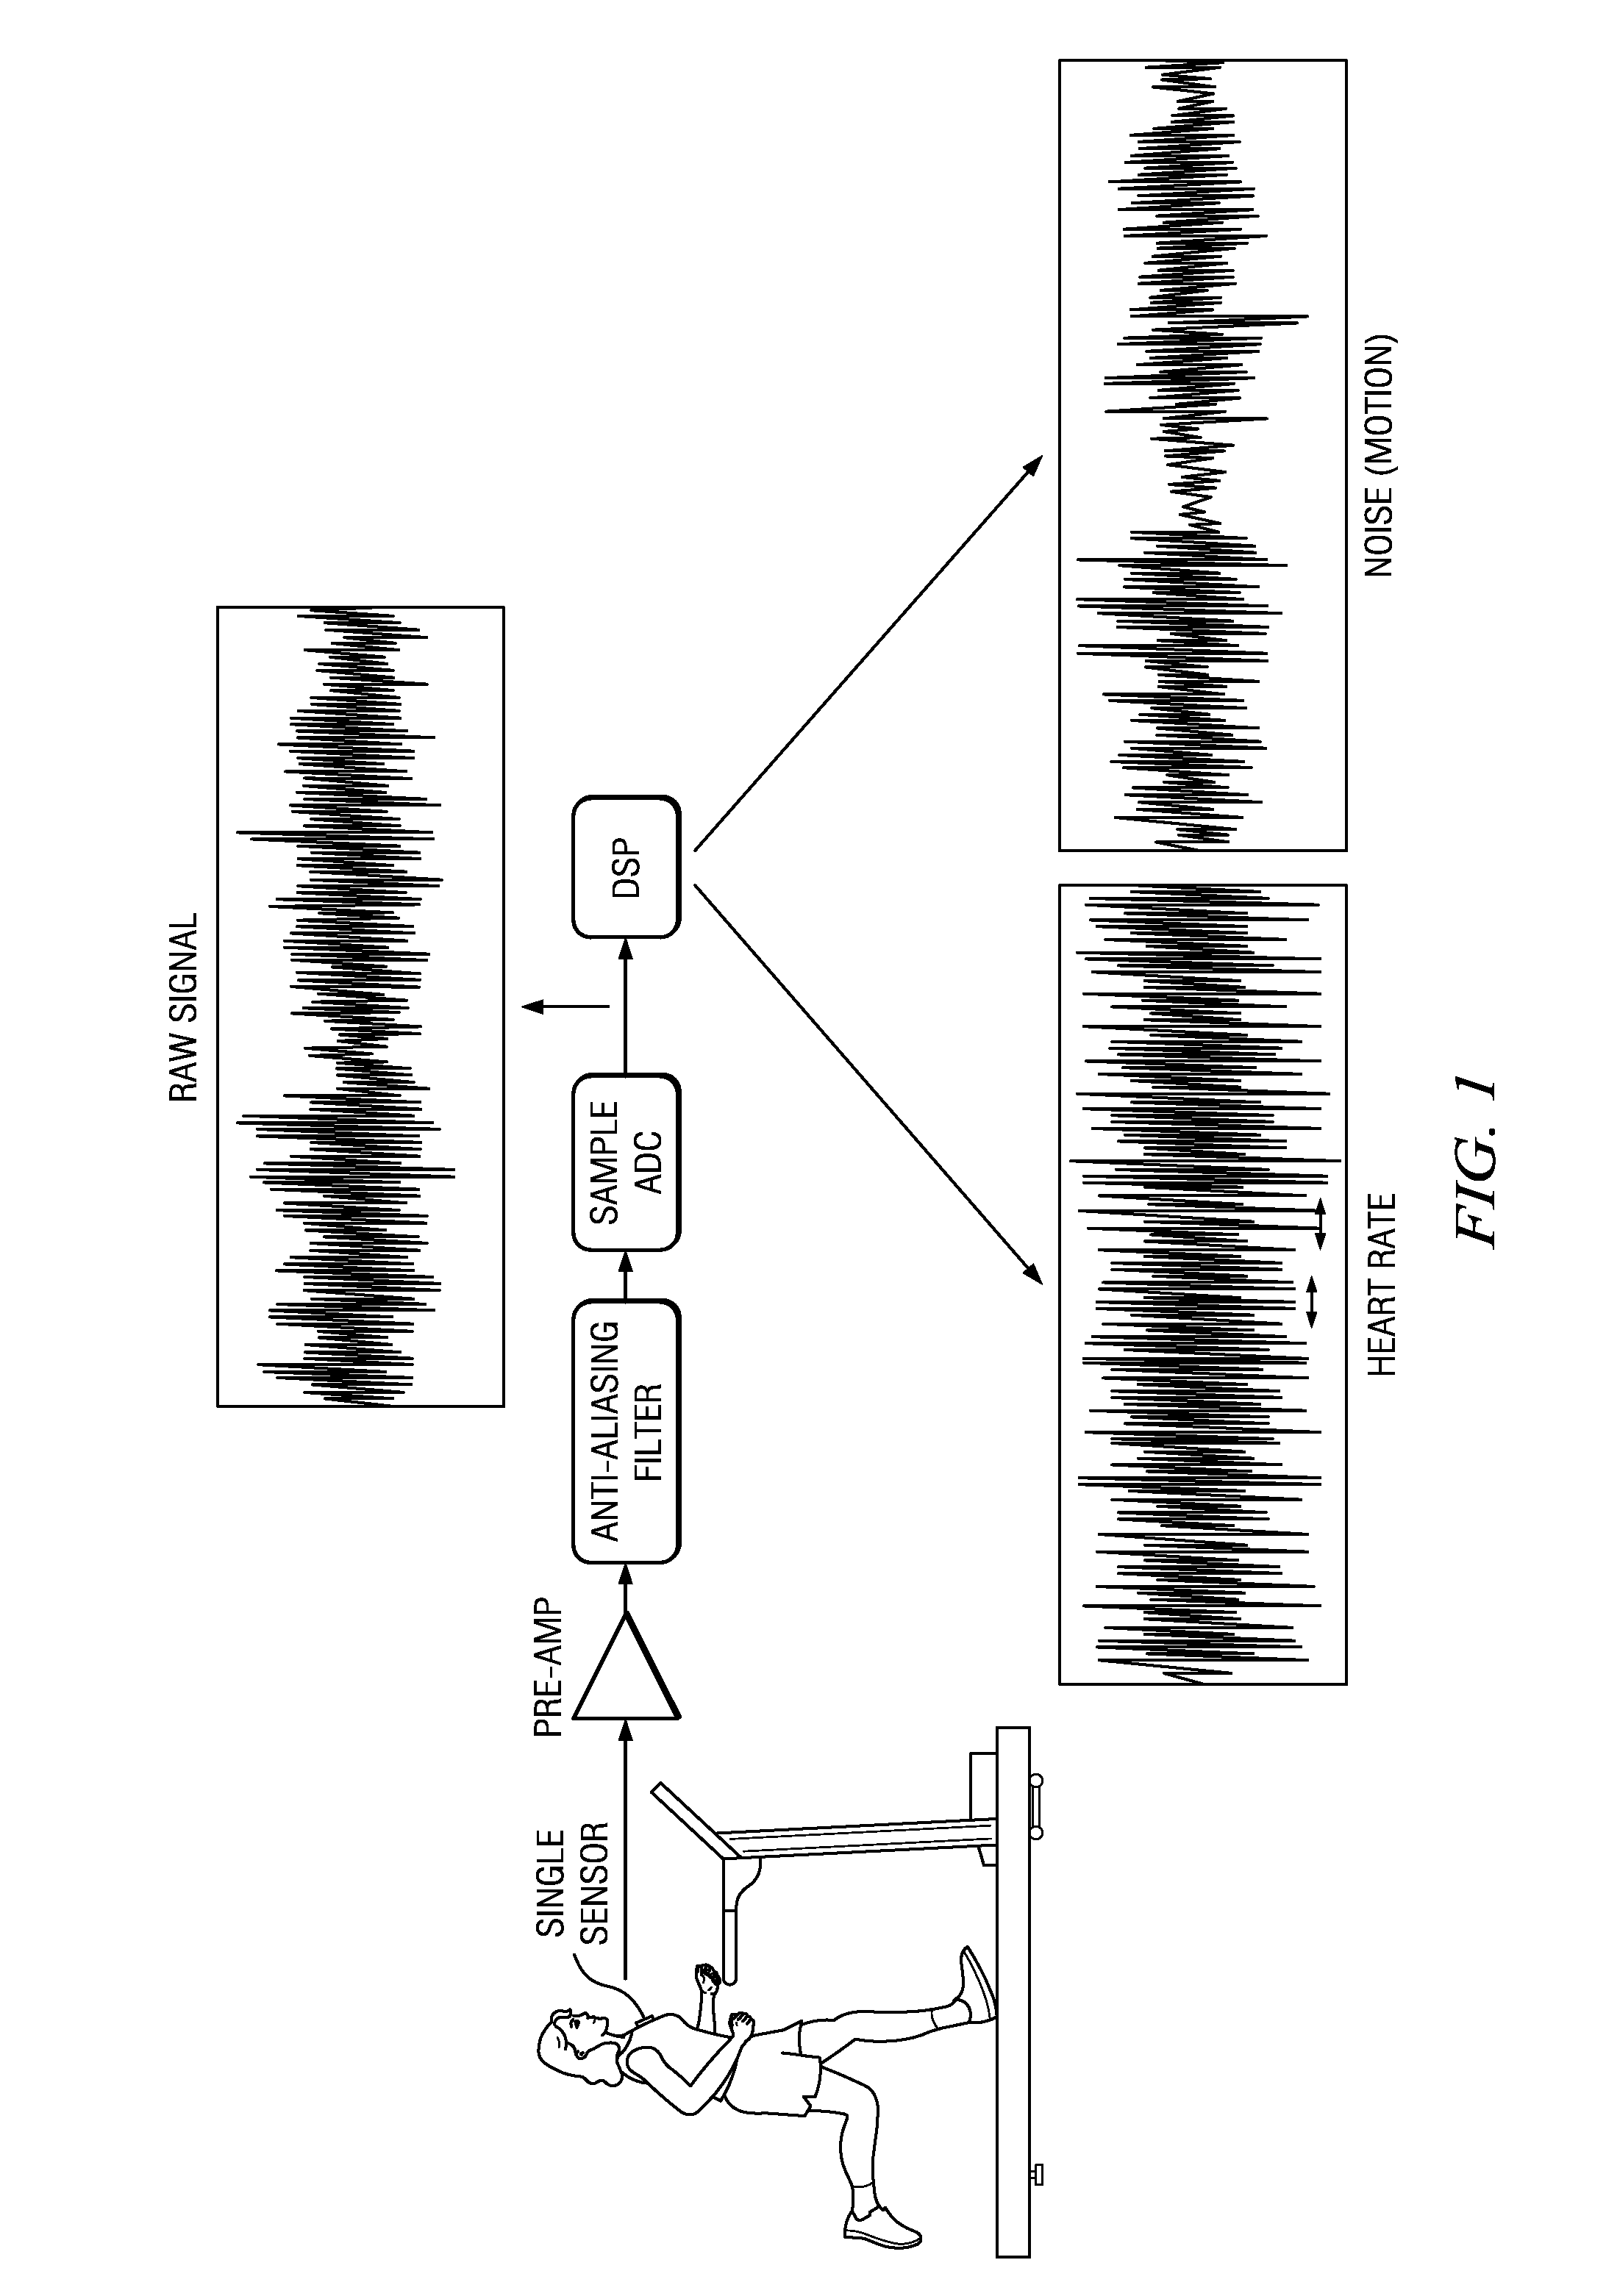 Heart monitors and processes with accelerometer motion artifact cancellation, and other electronic systems